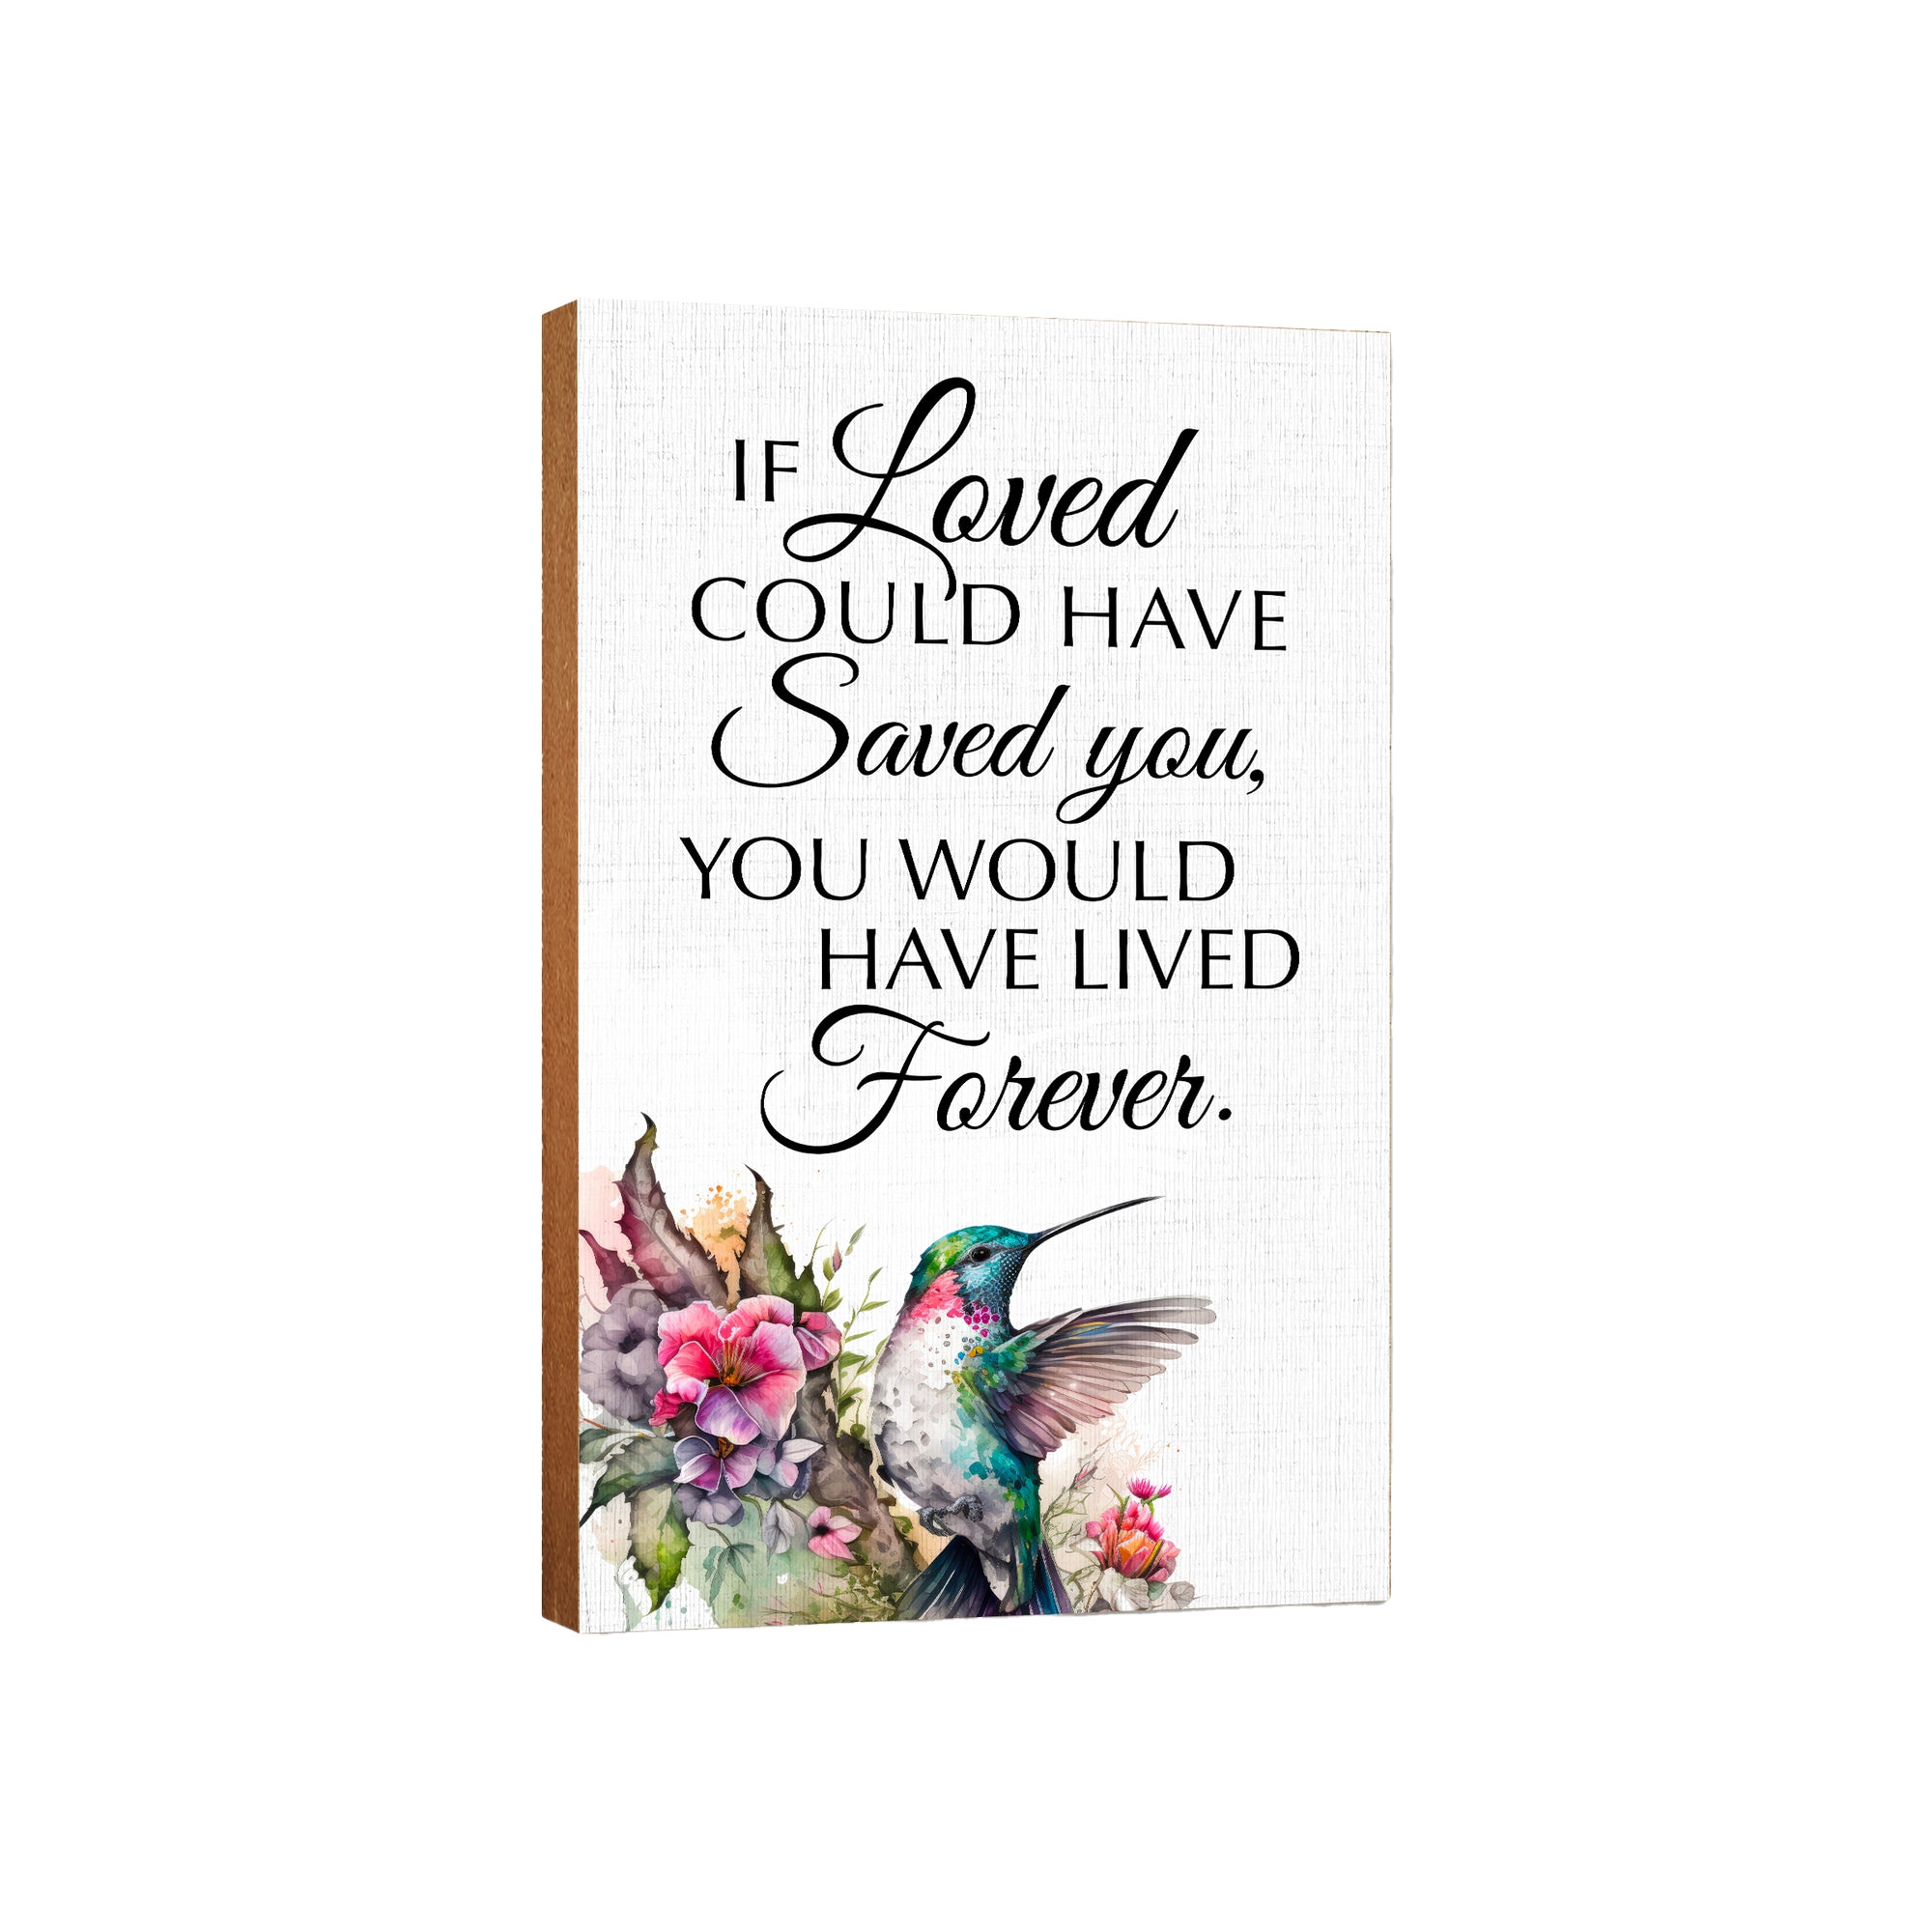 LifeSong Milestones Wooden Memorial Hummingbird Wall Plaque for Loss of Loved One